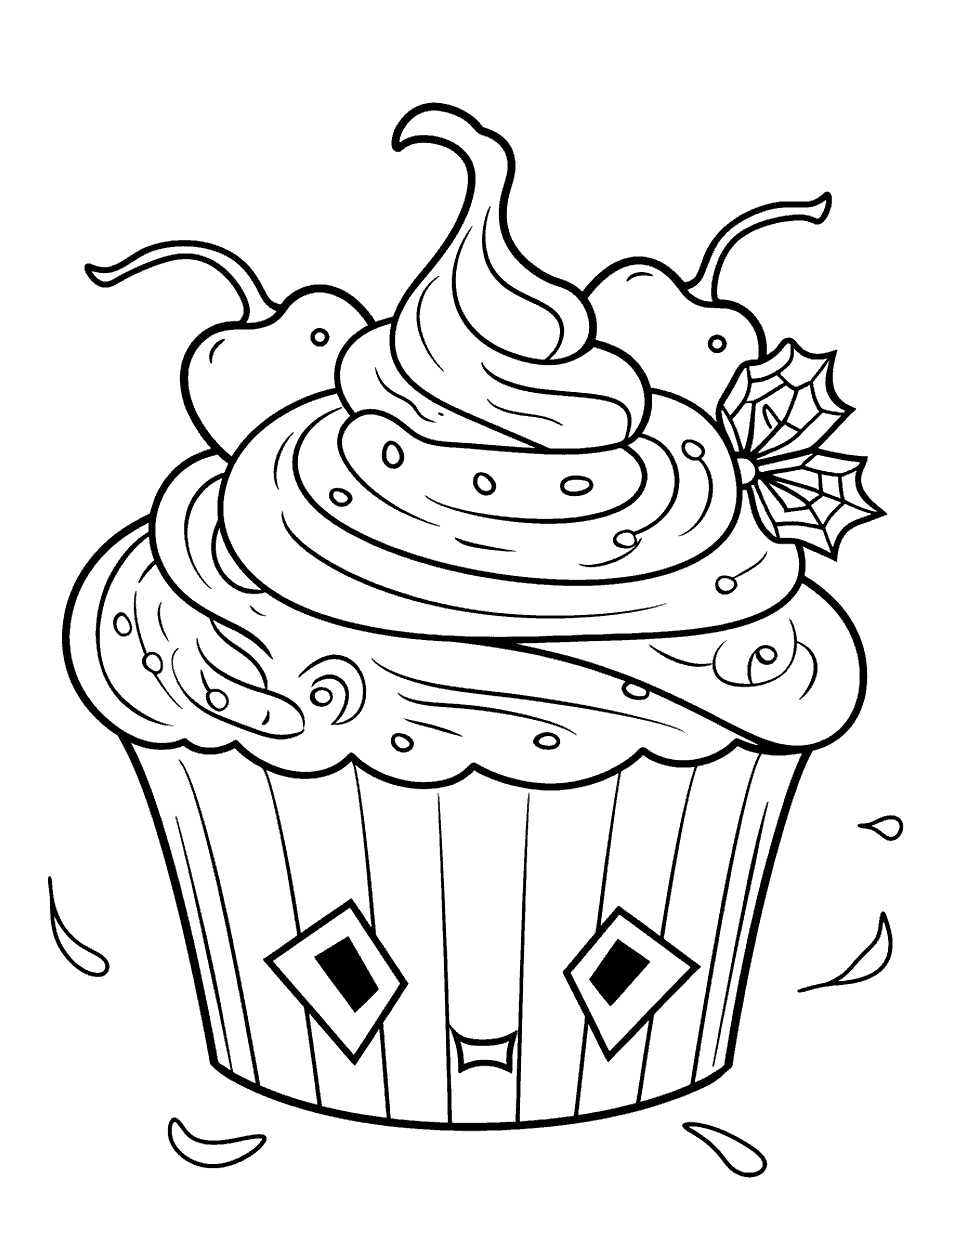 Halloween Themed Cupcake Coloring Page - A spooky cupcake decorated with Halloween motifs.